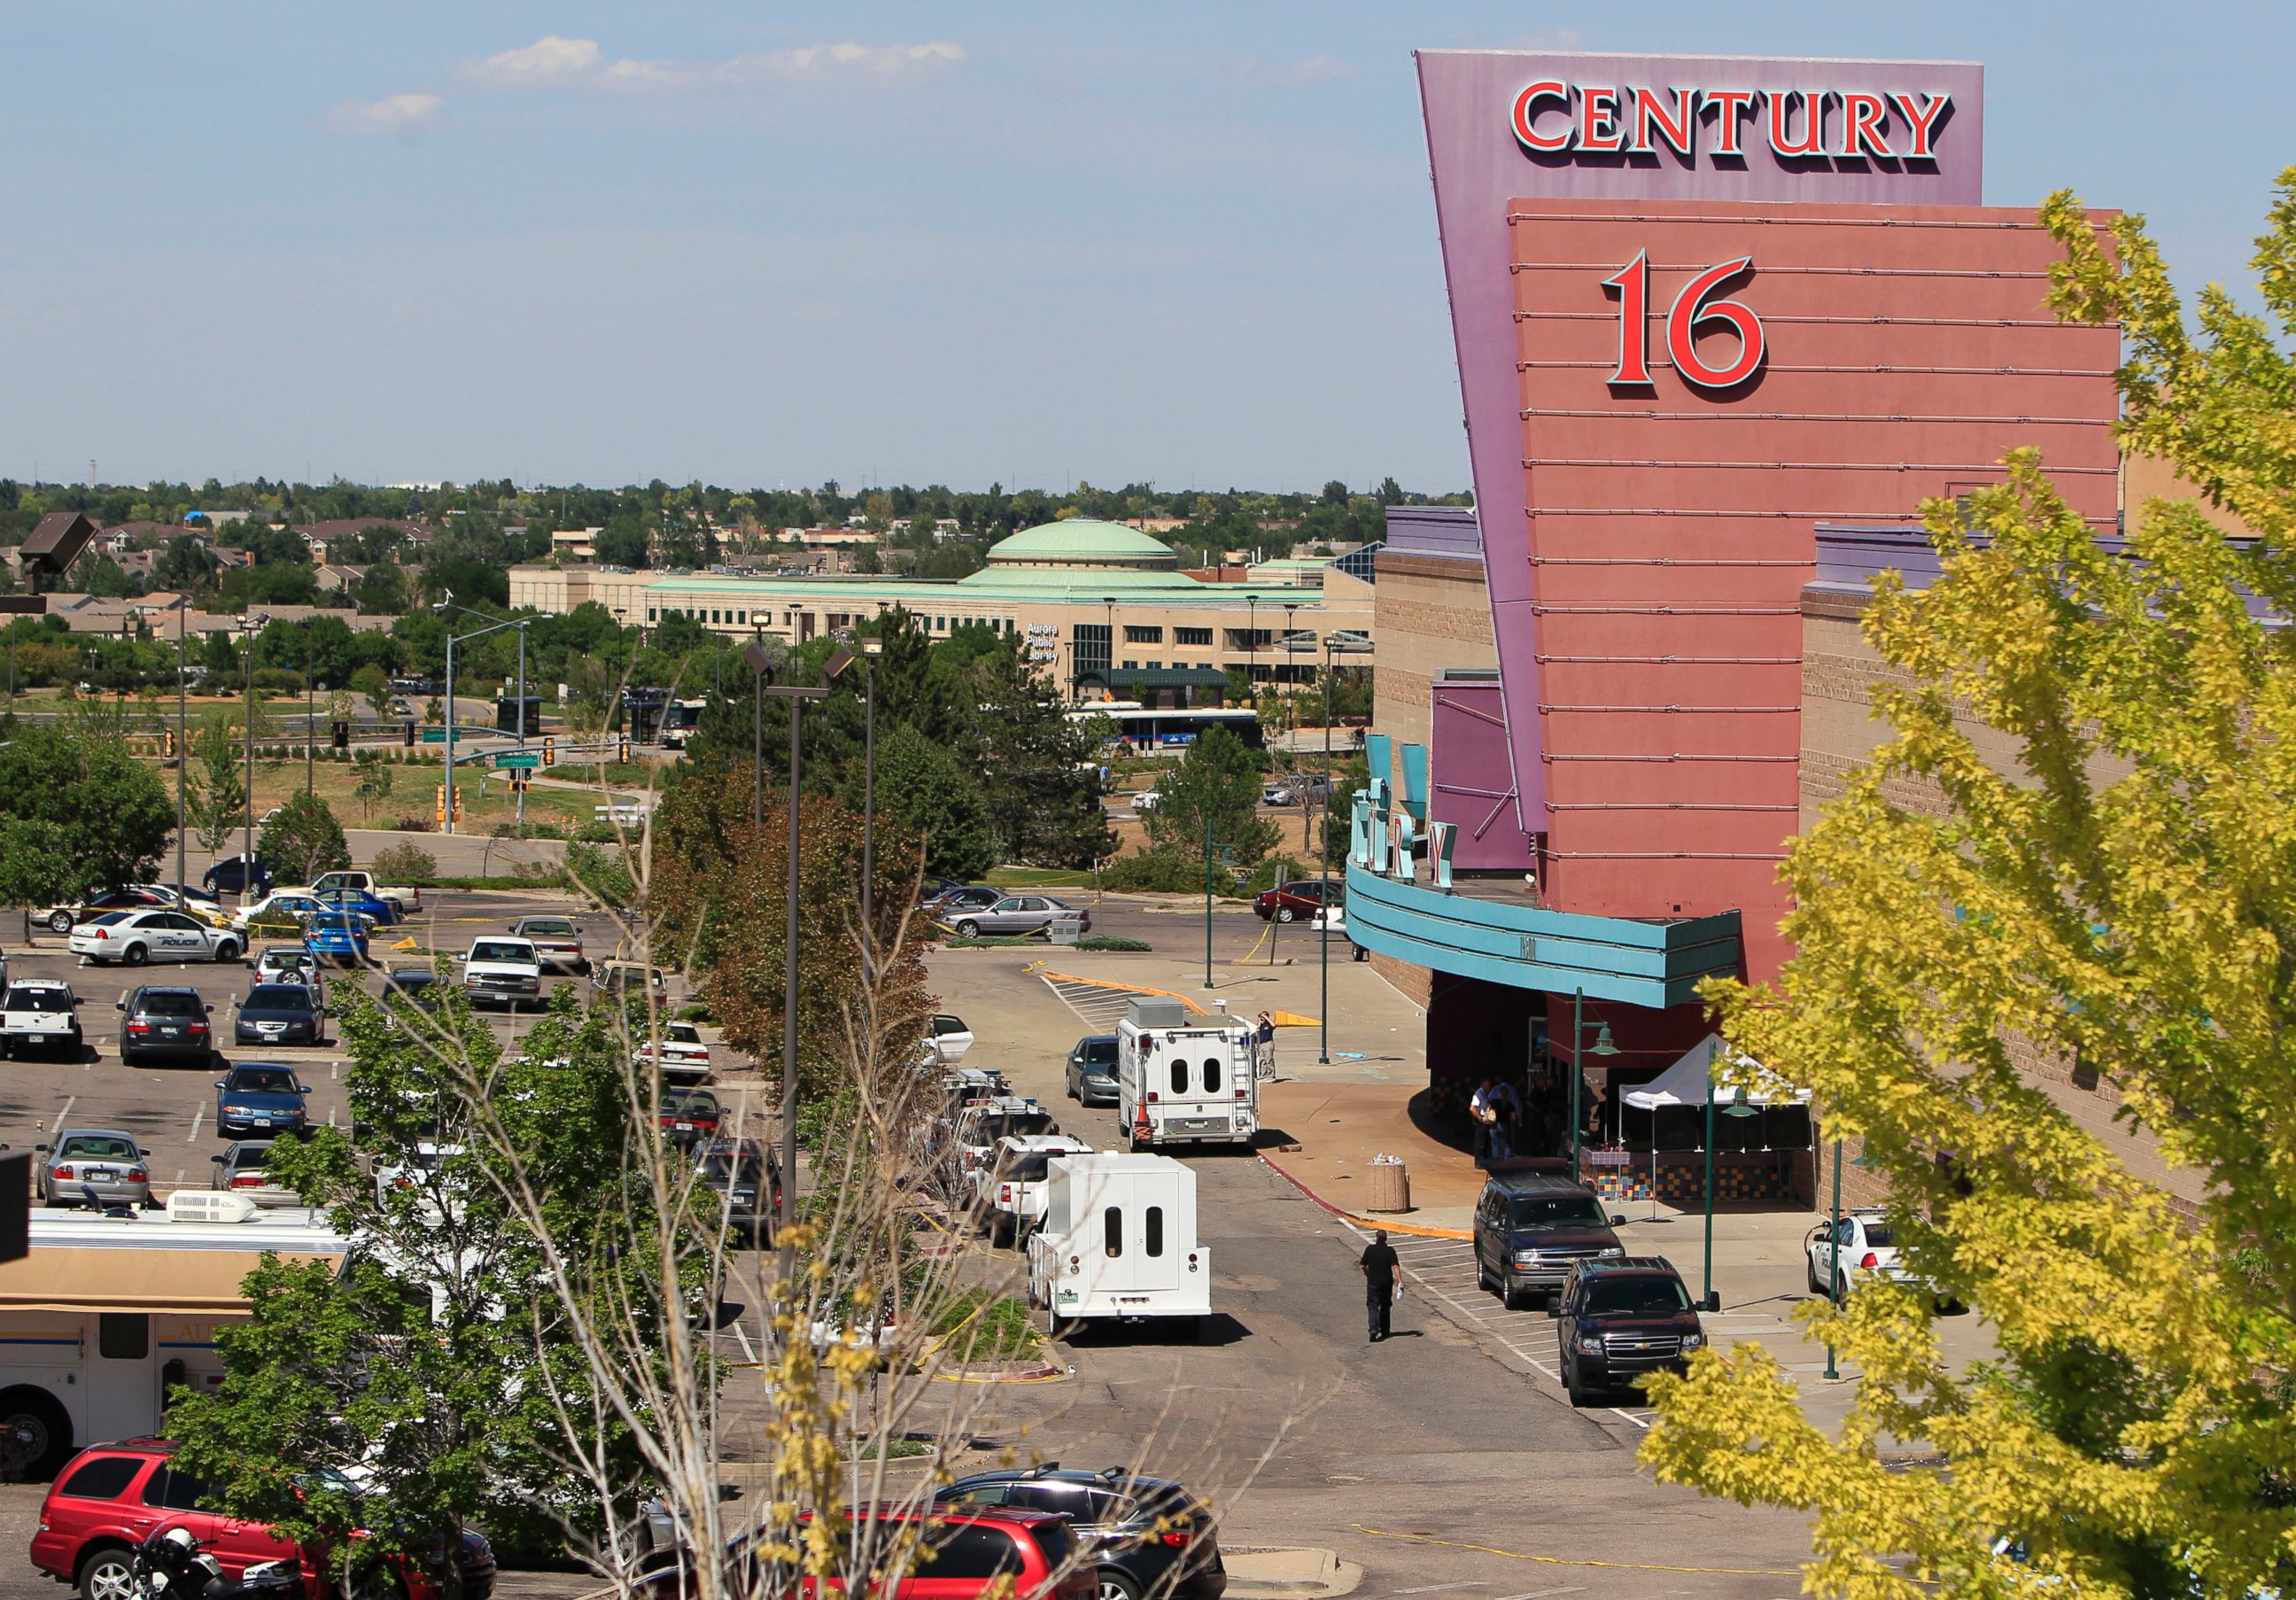 PHOTO: An overhead view of activities at the Century 16 theater east of the Aurora Mall in Aurora, Colo., July 20, 2012.